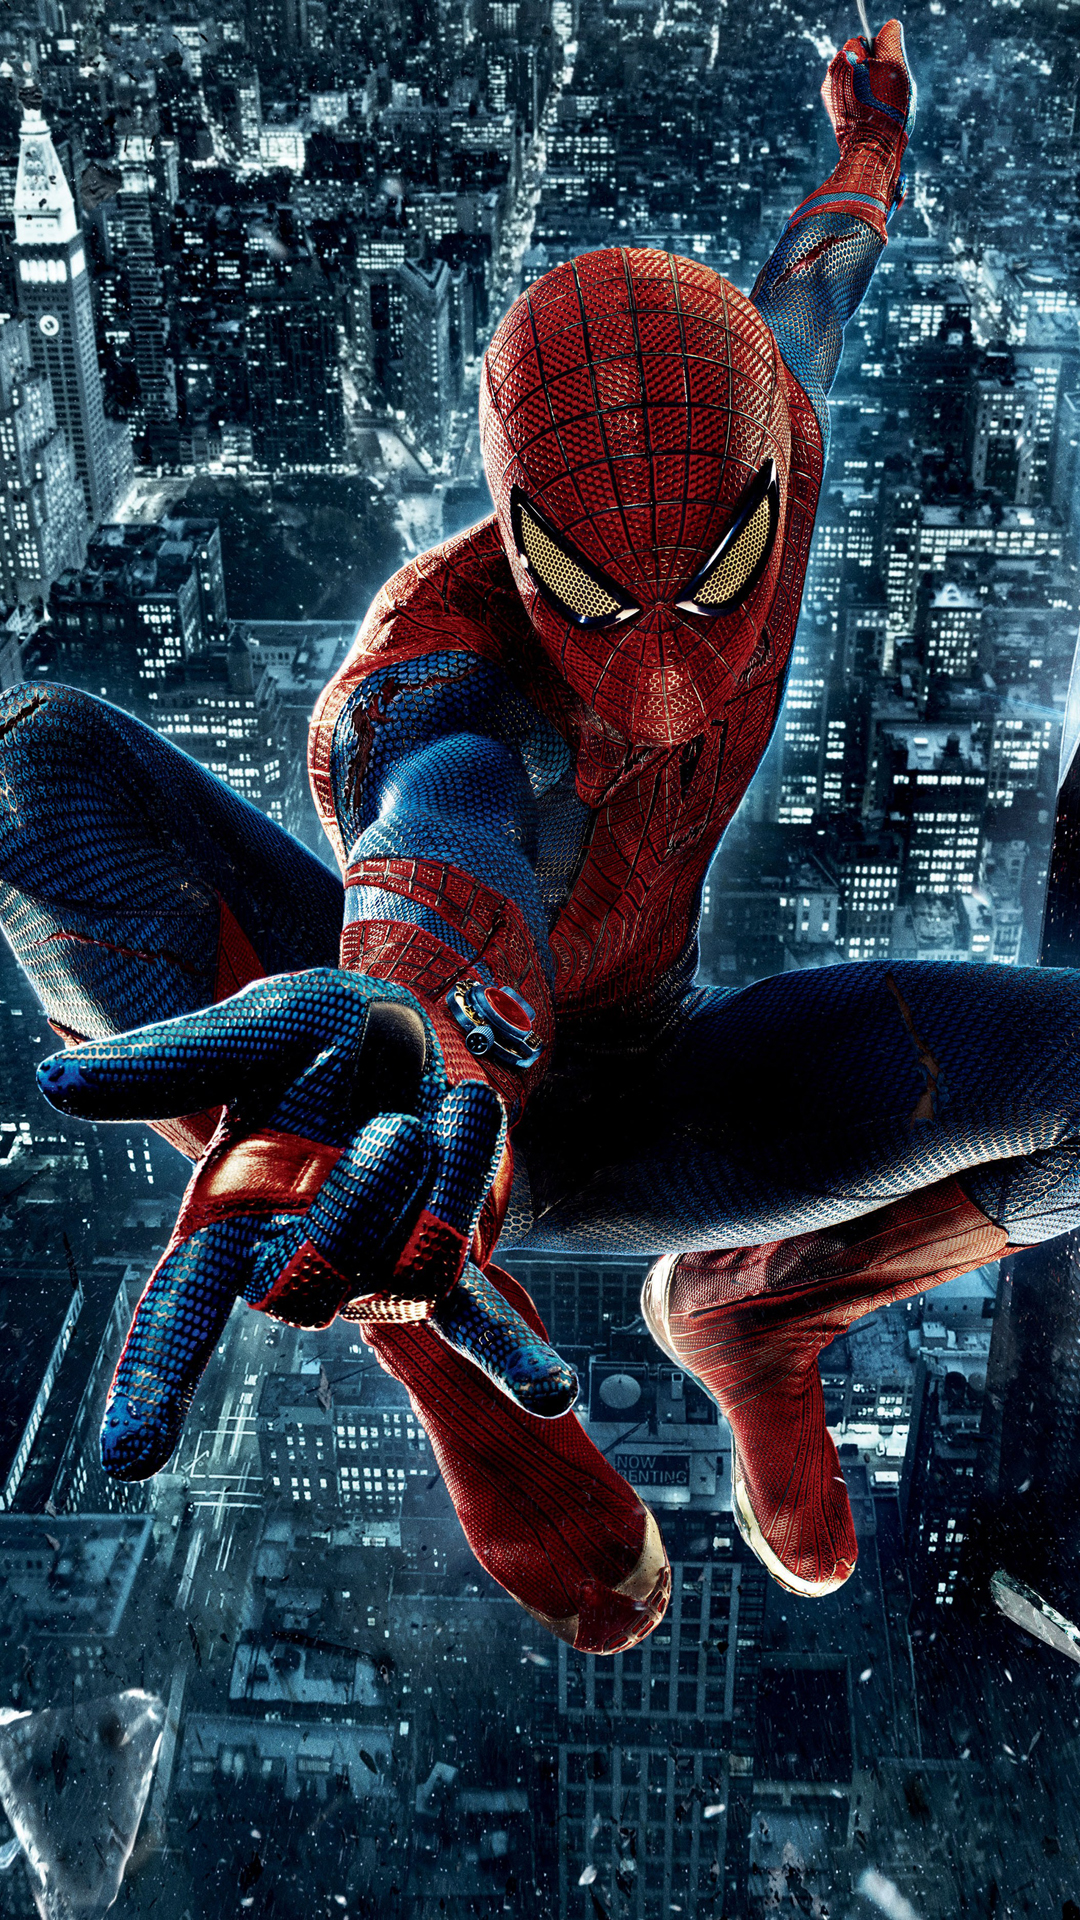 Spiderman htc one wallpaper   Best htc one wallpapers free and easy